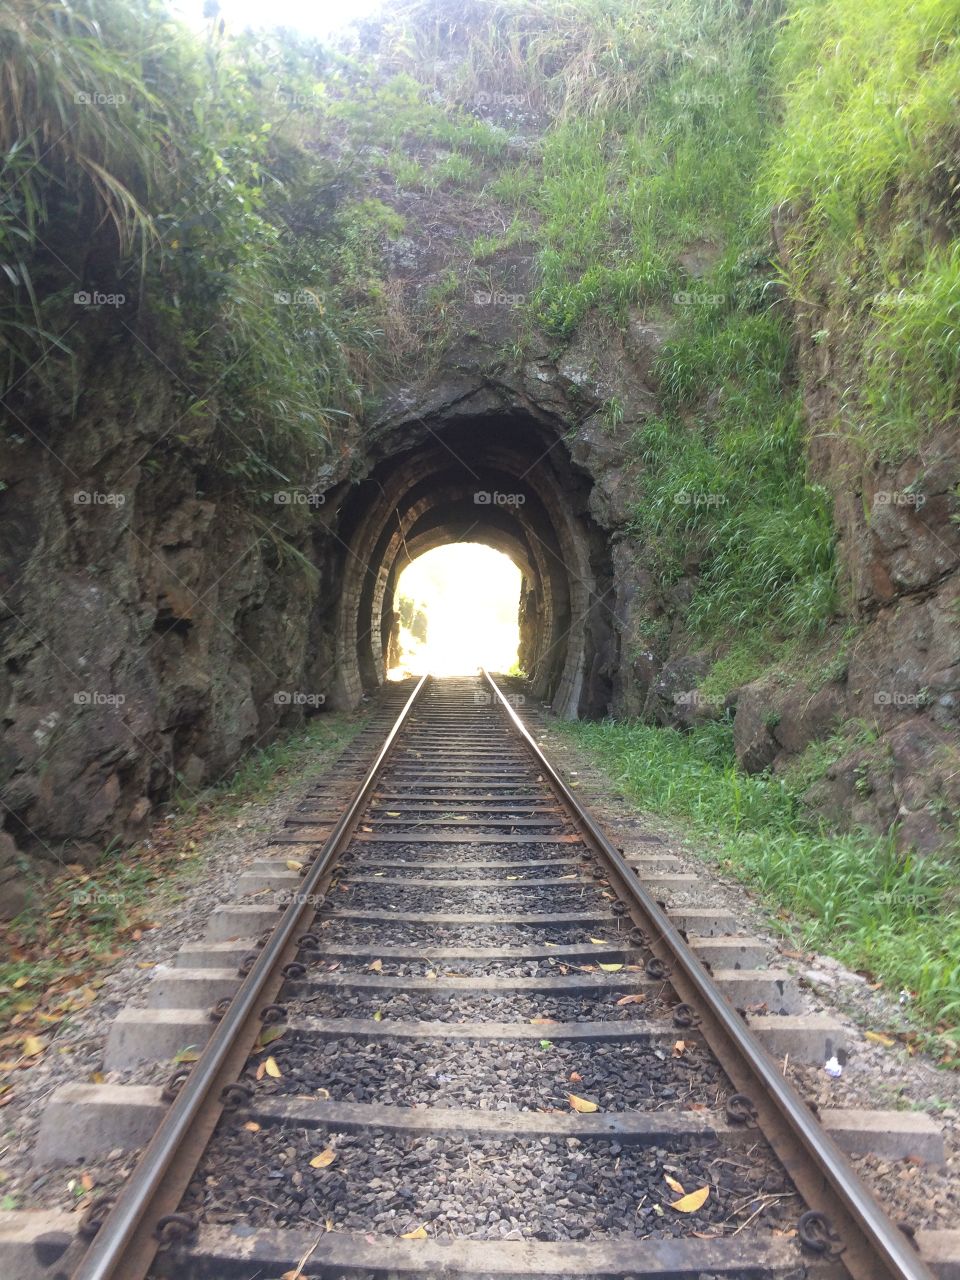 This railway tunnel located in kadugannawa .this tunnel is very older one